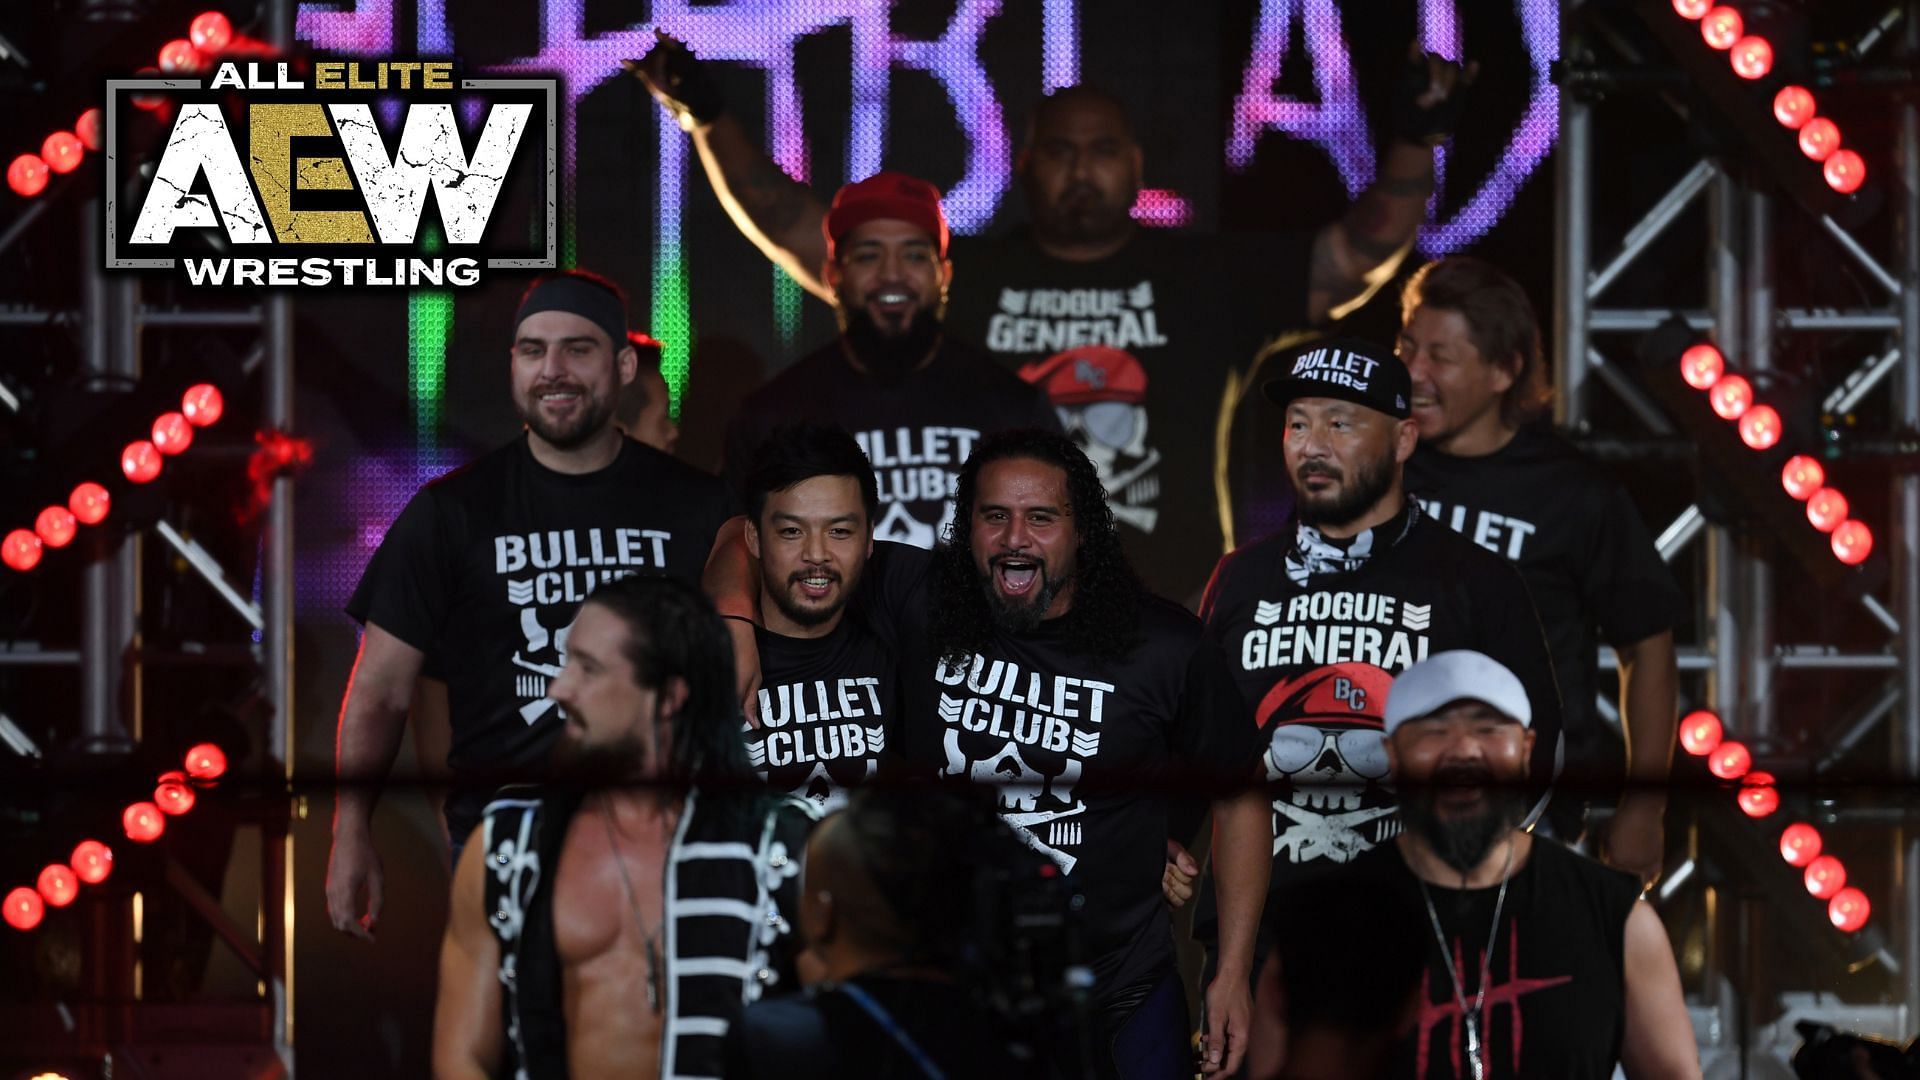 Will an AEW star ascend to Bullet Club